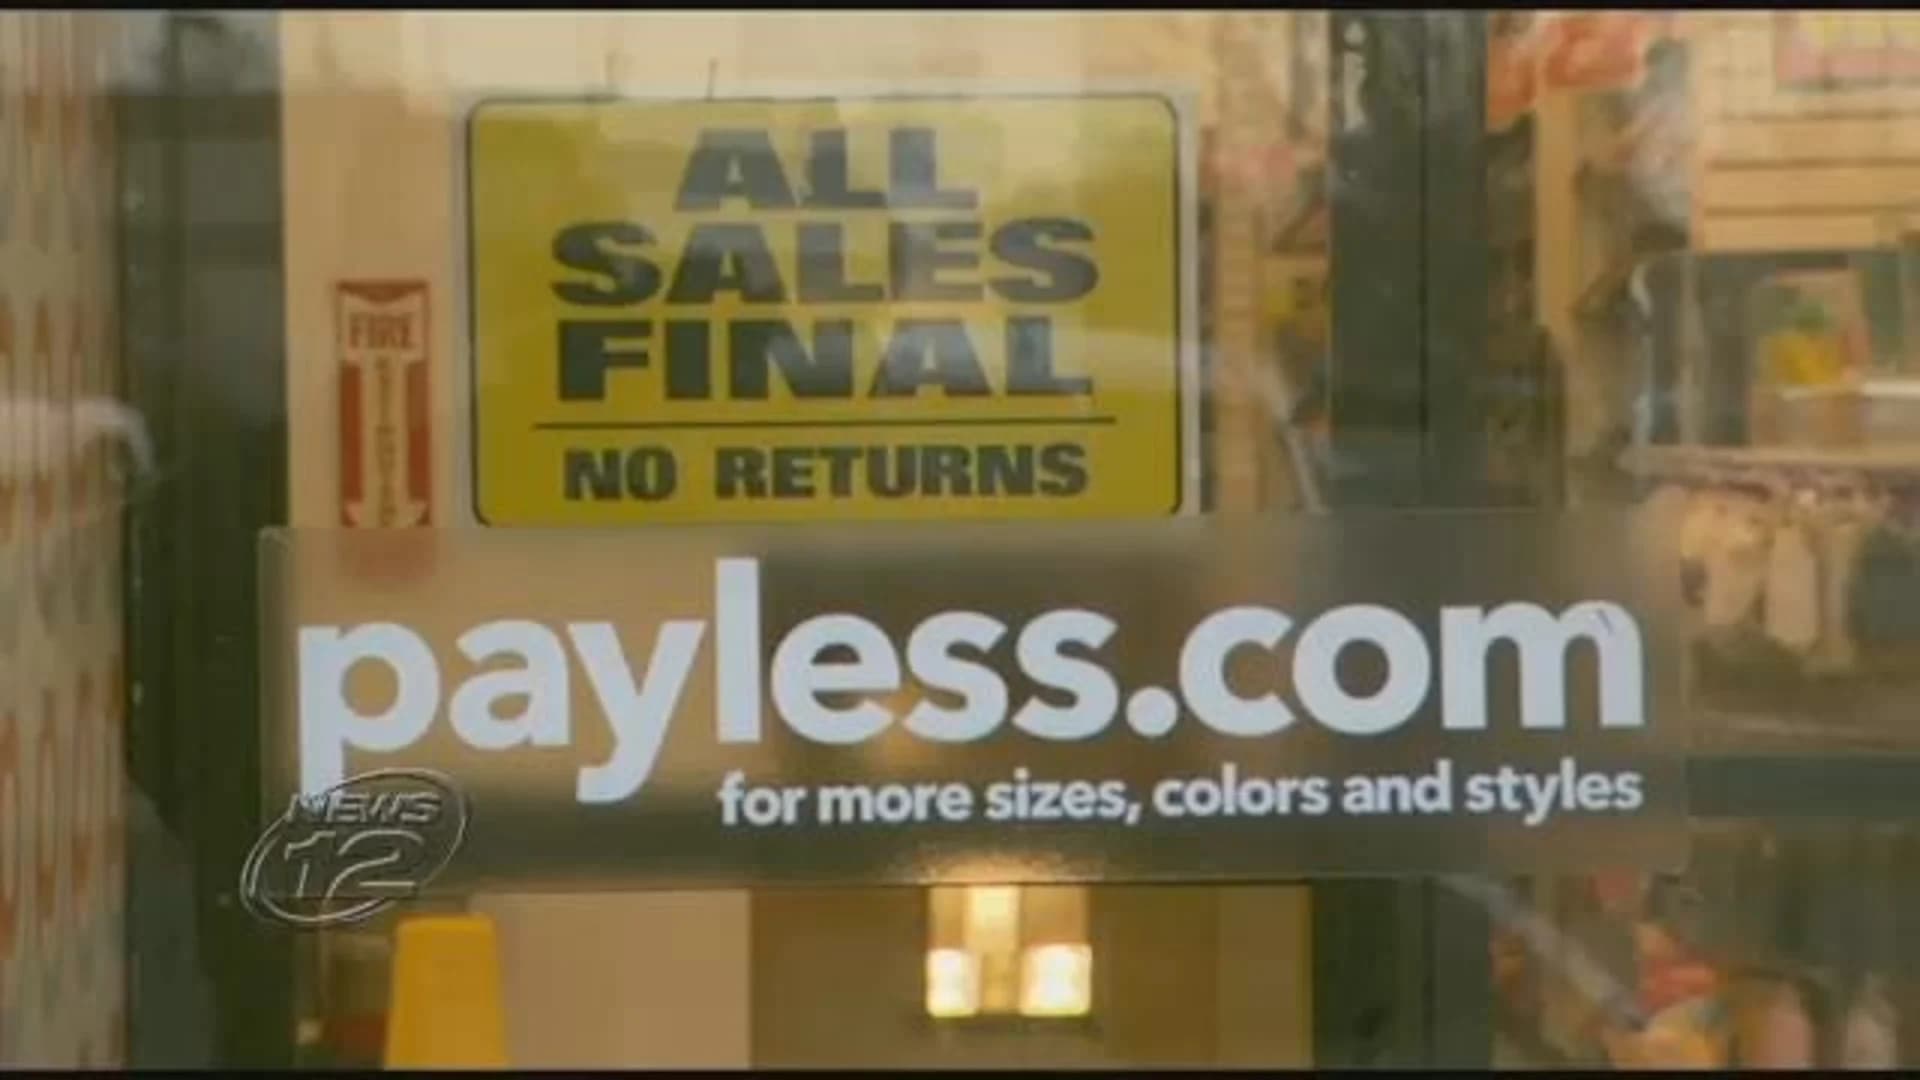 Payless ShoeSource files for bankruptcy protection